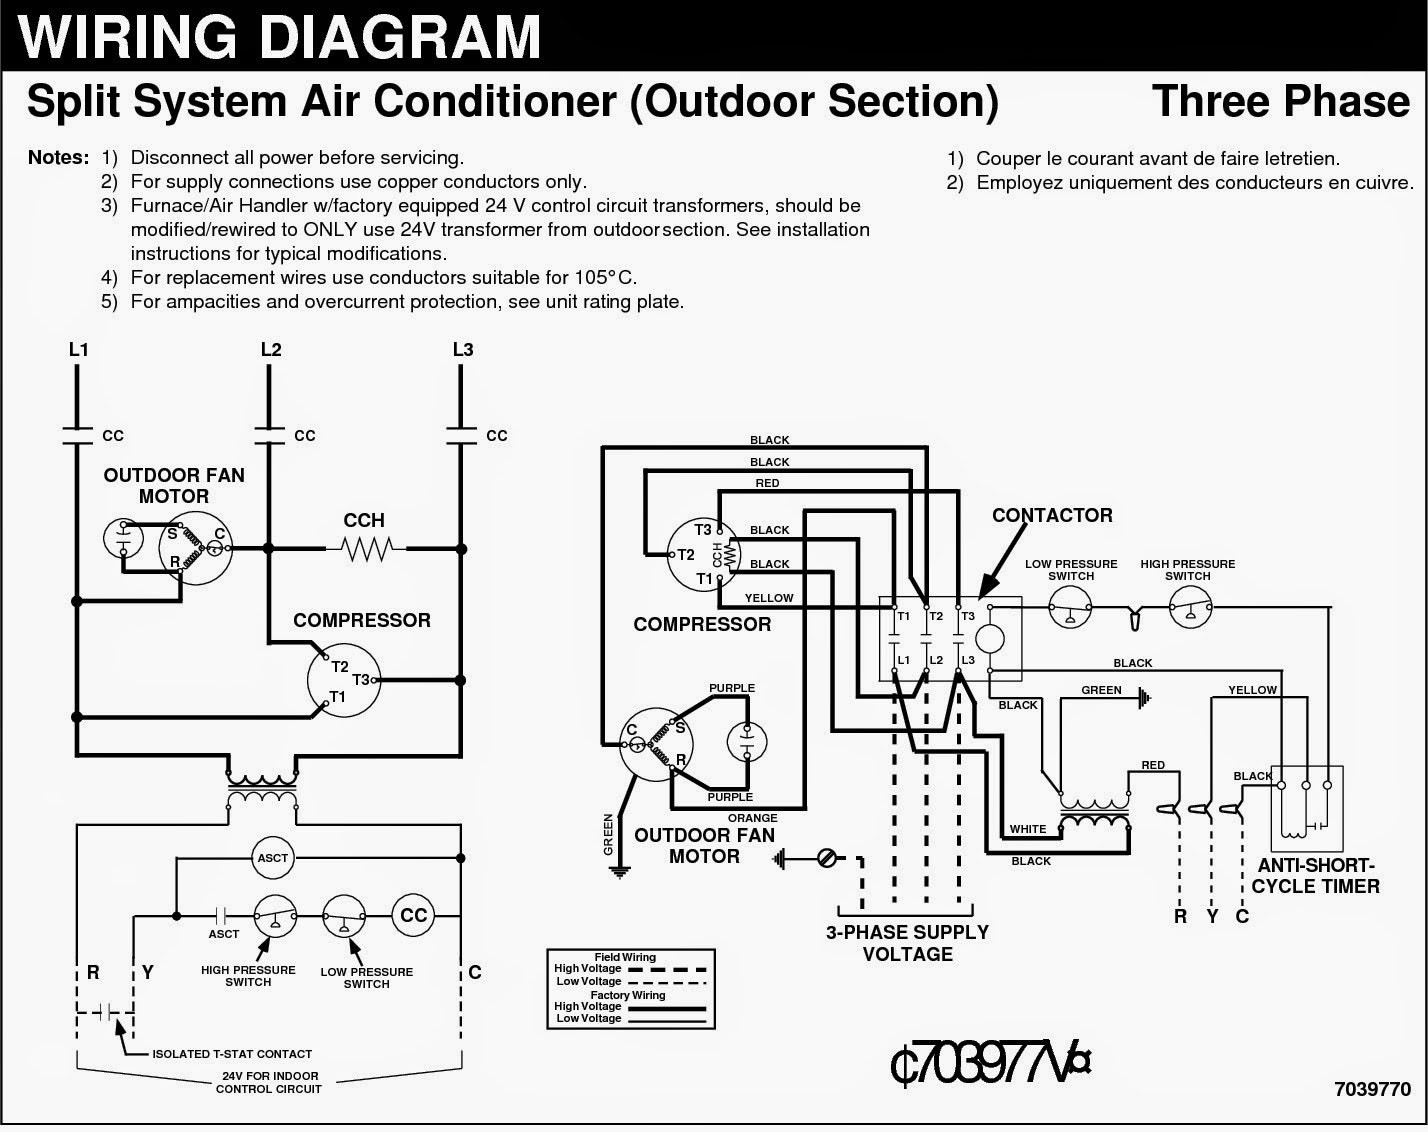 Split system air conditioner wiring diagram 3 phase admirable fig 13 cooling units three electrical